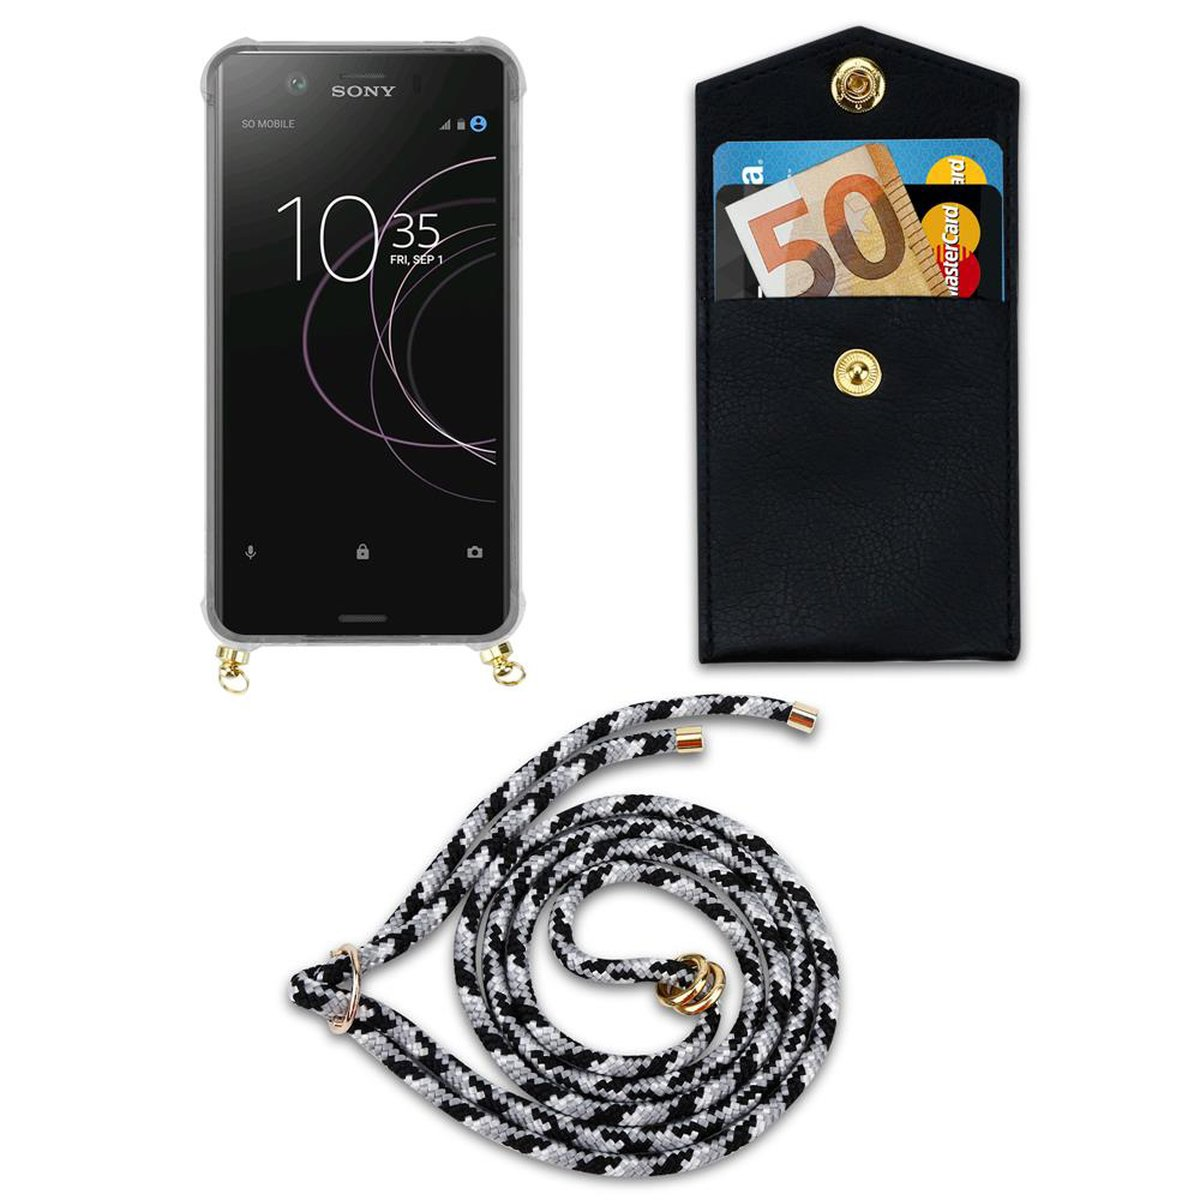 SCHWARZ XZ1, Band und CAMOUFLAGE Handy Gold Hülle, abnehmbarer Kordel Sony, Backcover, mit CADORABO Kette Xperia Ringen,